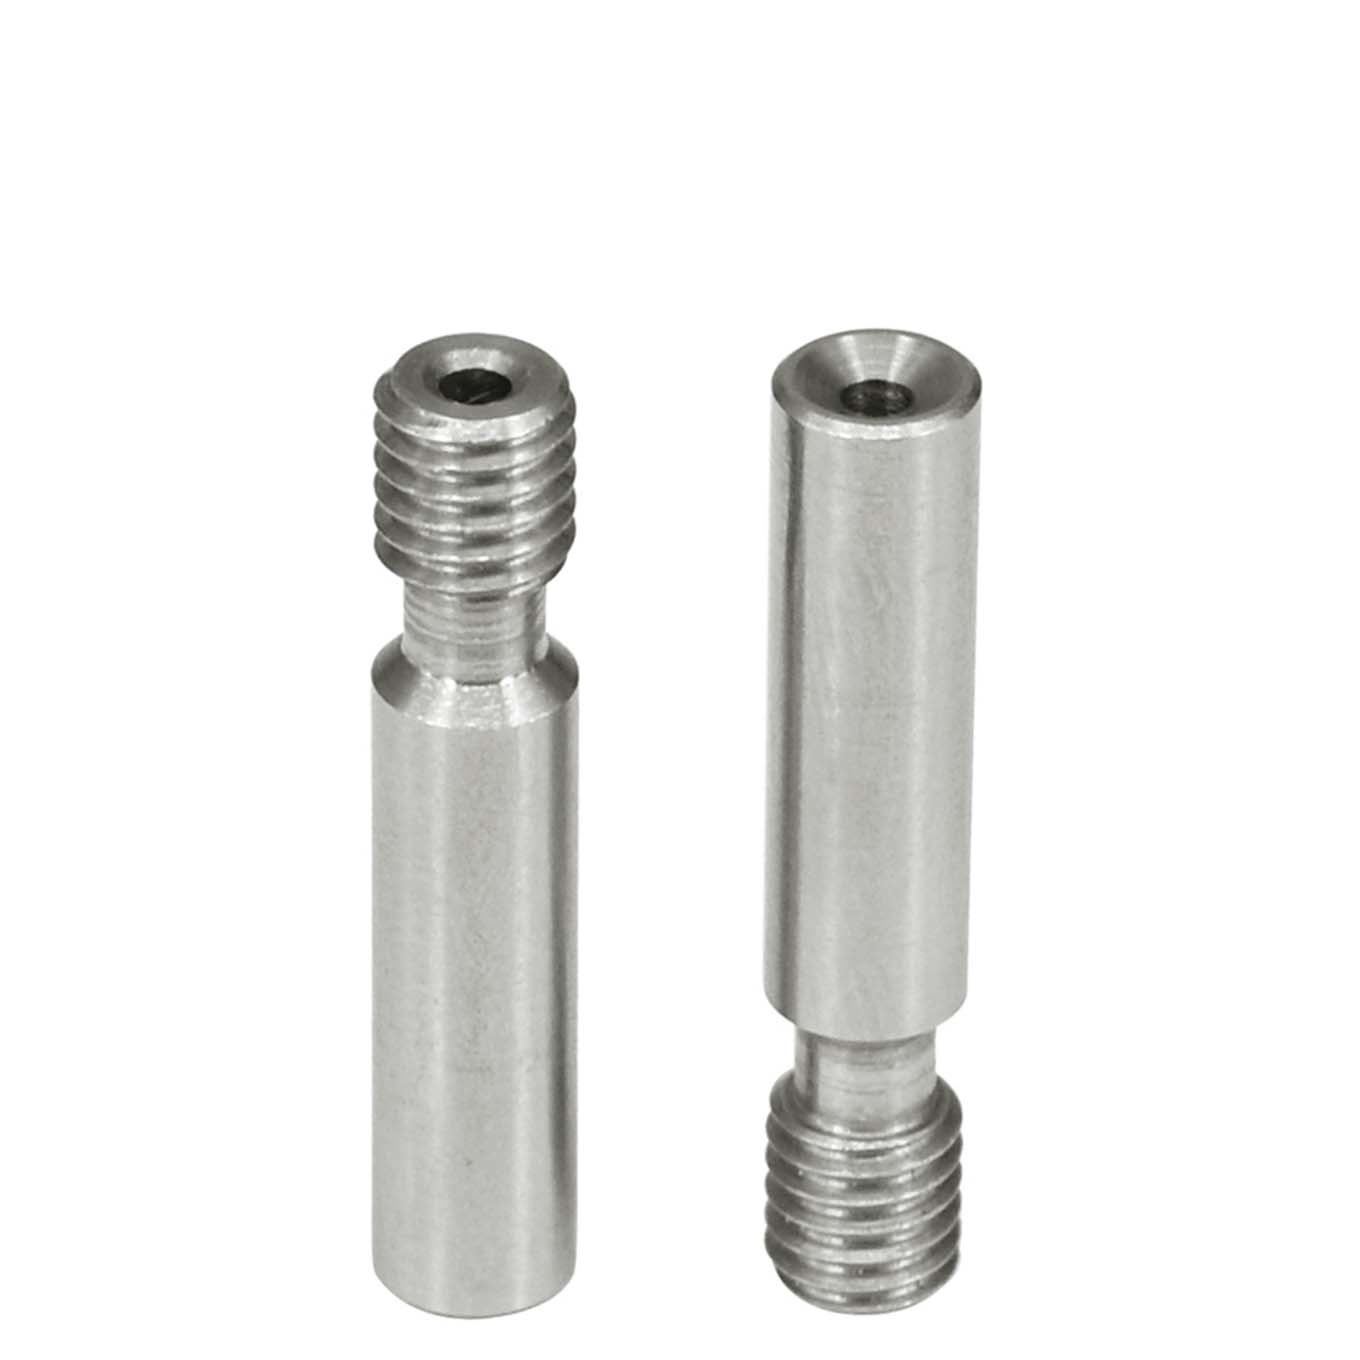  Stainless steel Nozzle Pipe mk8 hotend heatbreak Outer 3mm Inner 2mm Manufactures